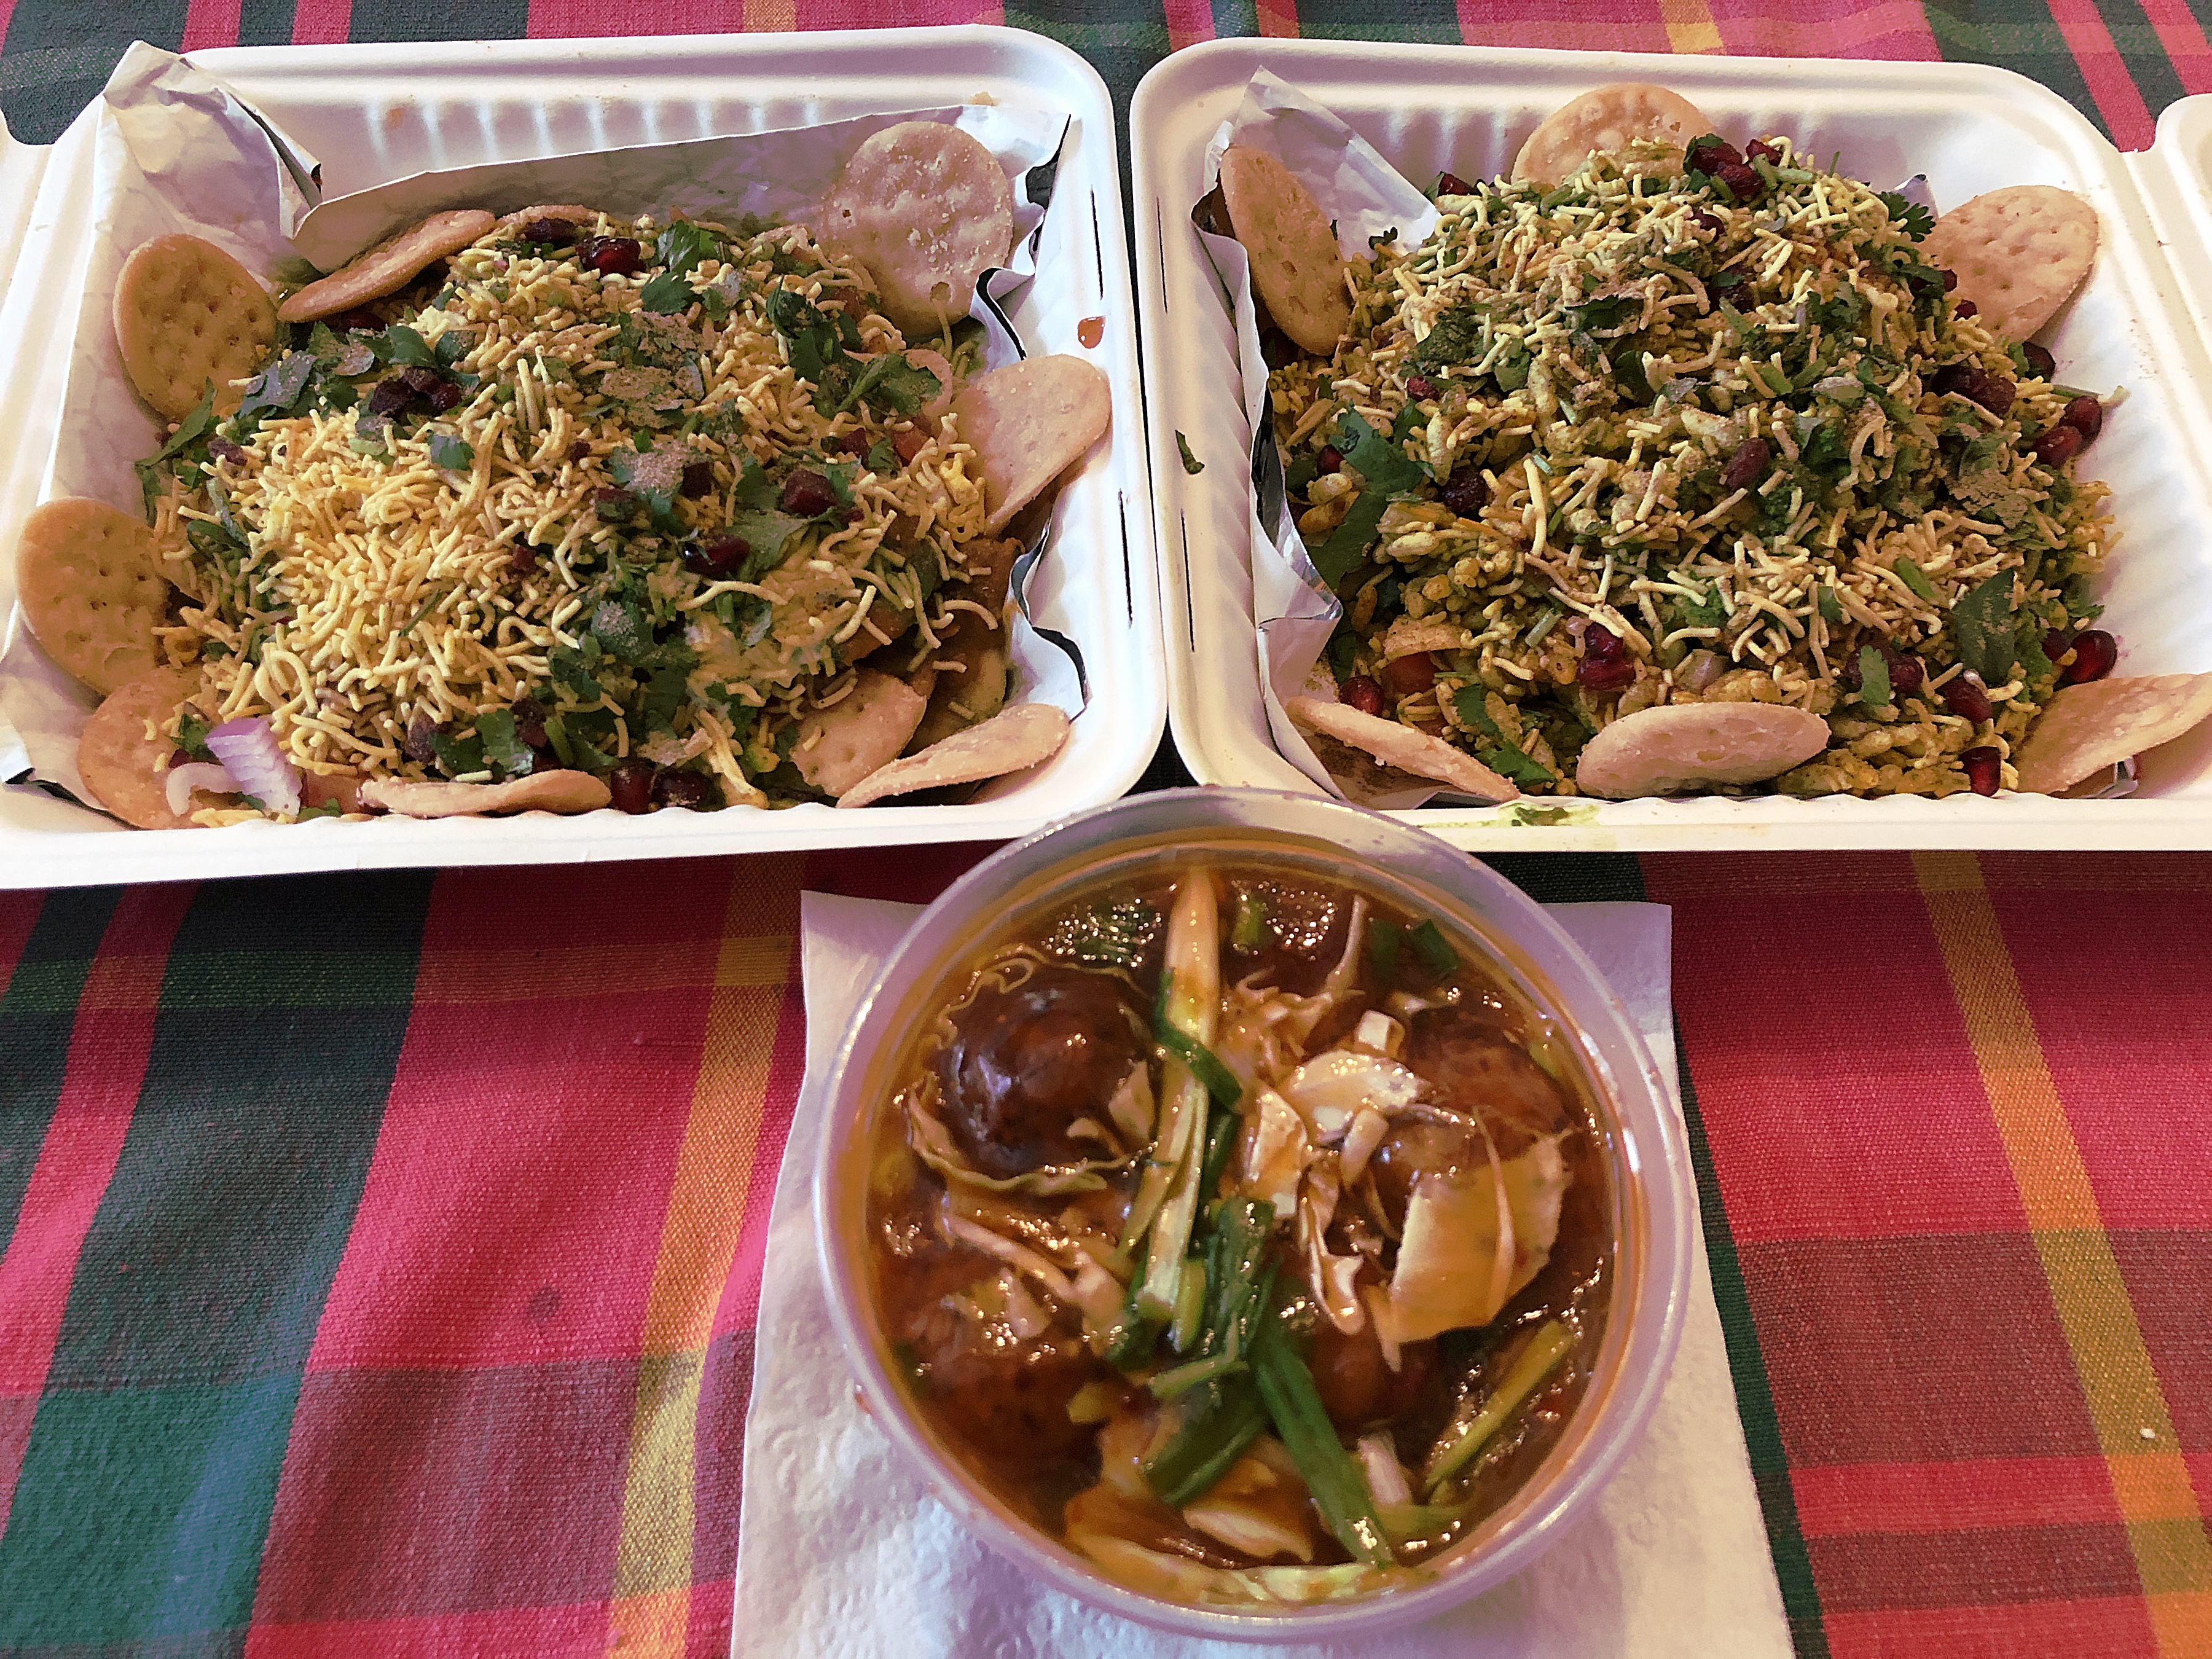 Three tempting takeouts from Shreeji Indian: On the top row, Papdi chaat and bhel puri; below, veggie Manchurian, Chinese food made Indian-style.